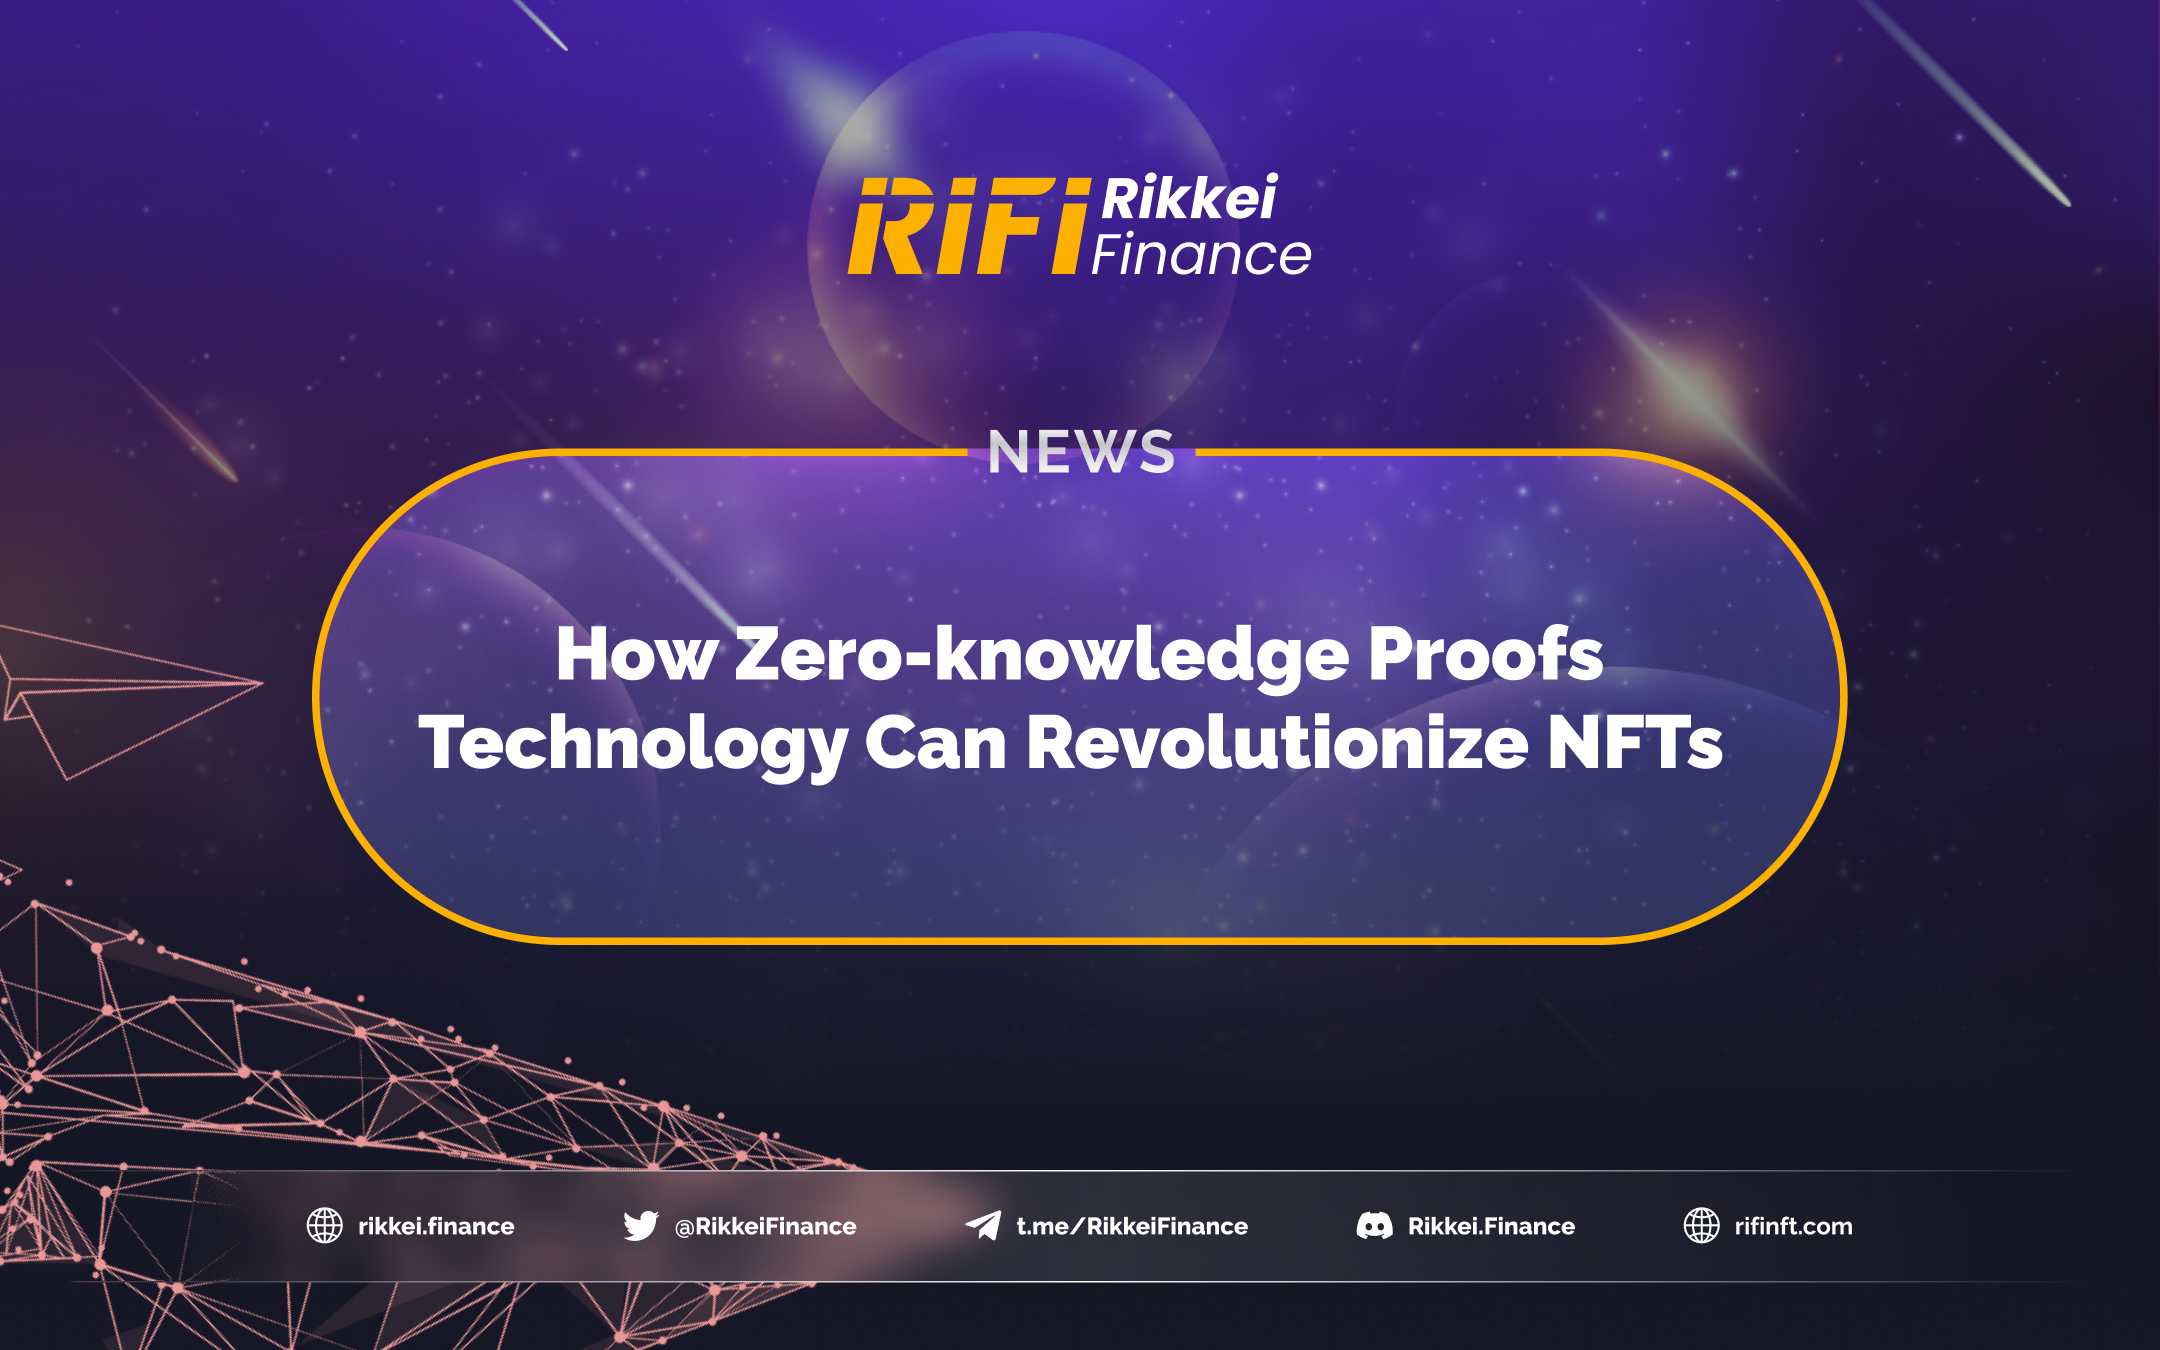  How Zero-knowledge Proofs Technology Can Revolutionize NFTs